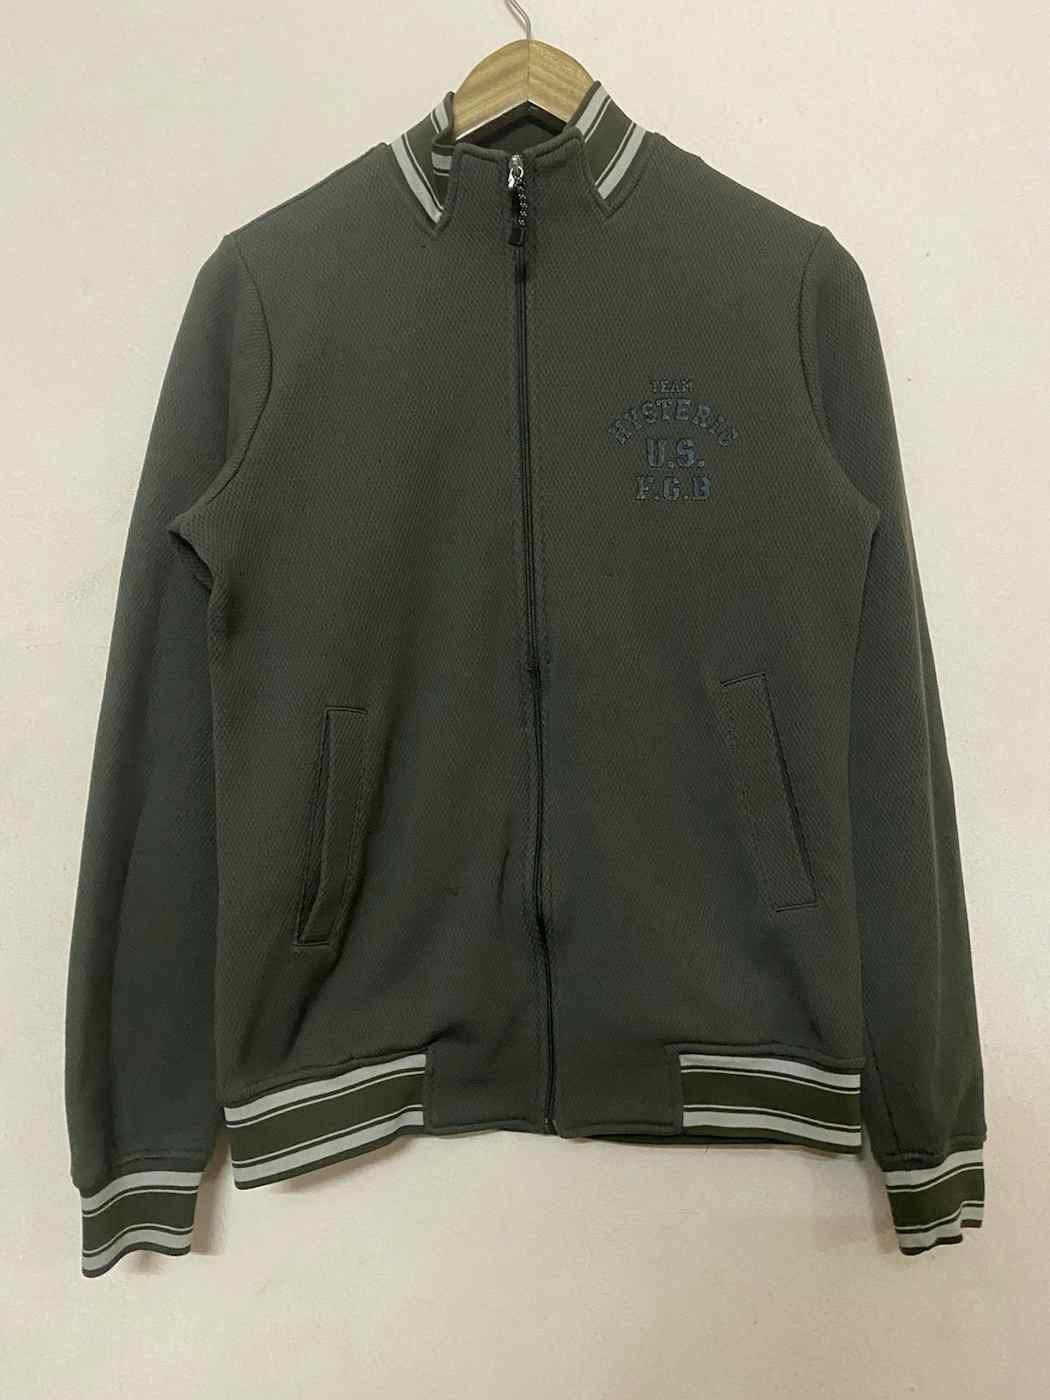 Pre-owned Hysteric Glamour X Vintage Hysteric Glamour Team U.s. Fgb Zipper Jacket In Dark Green